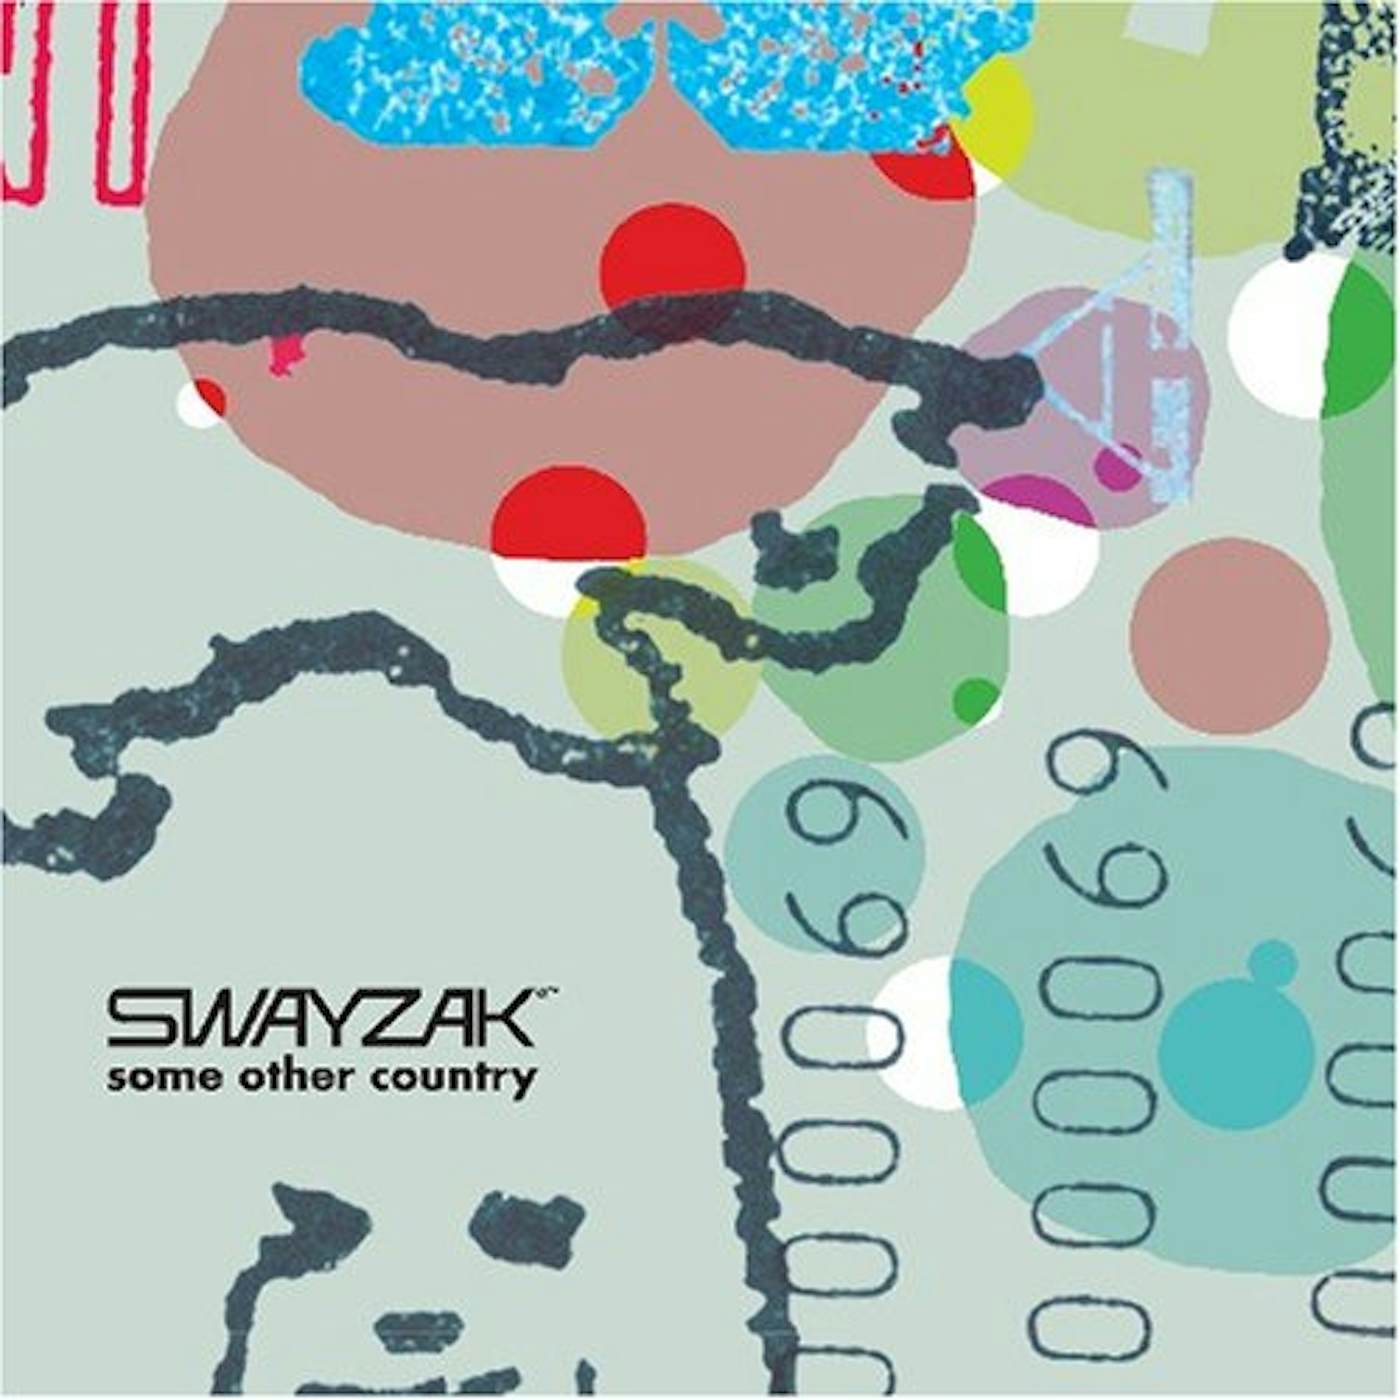 Swayzak SOME OTHER COUNTRY CD